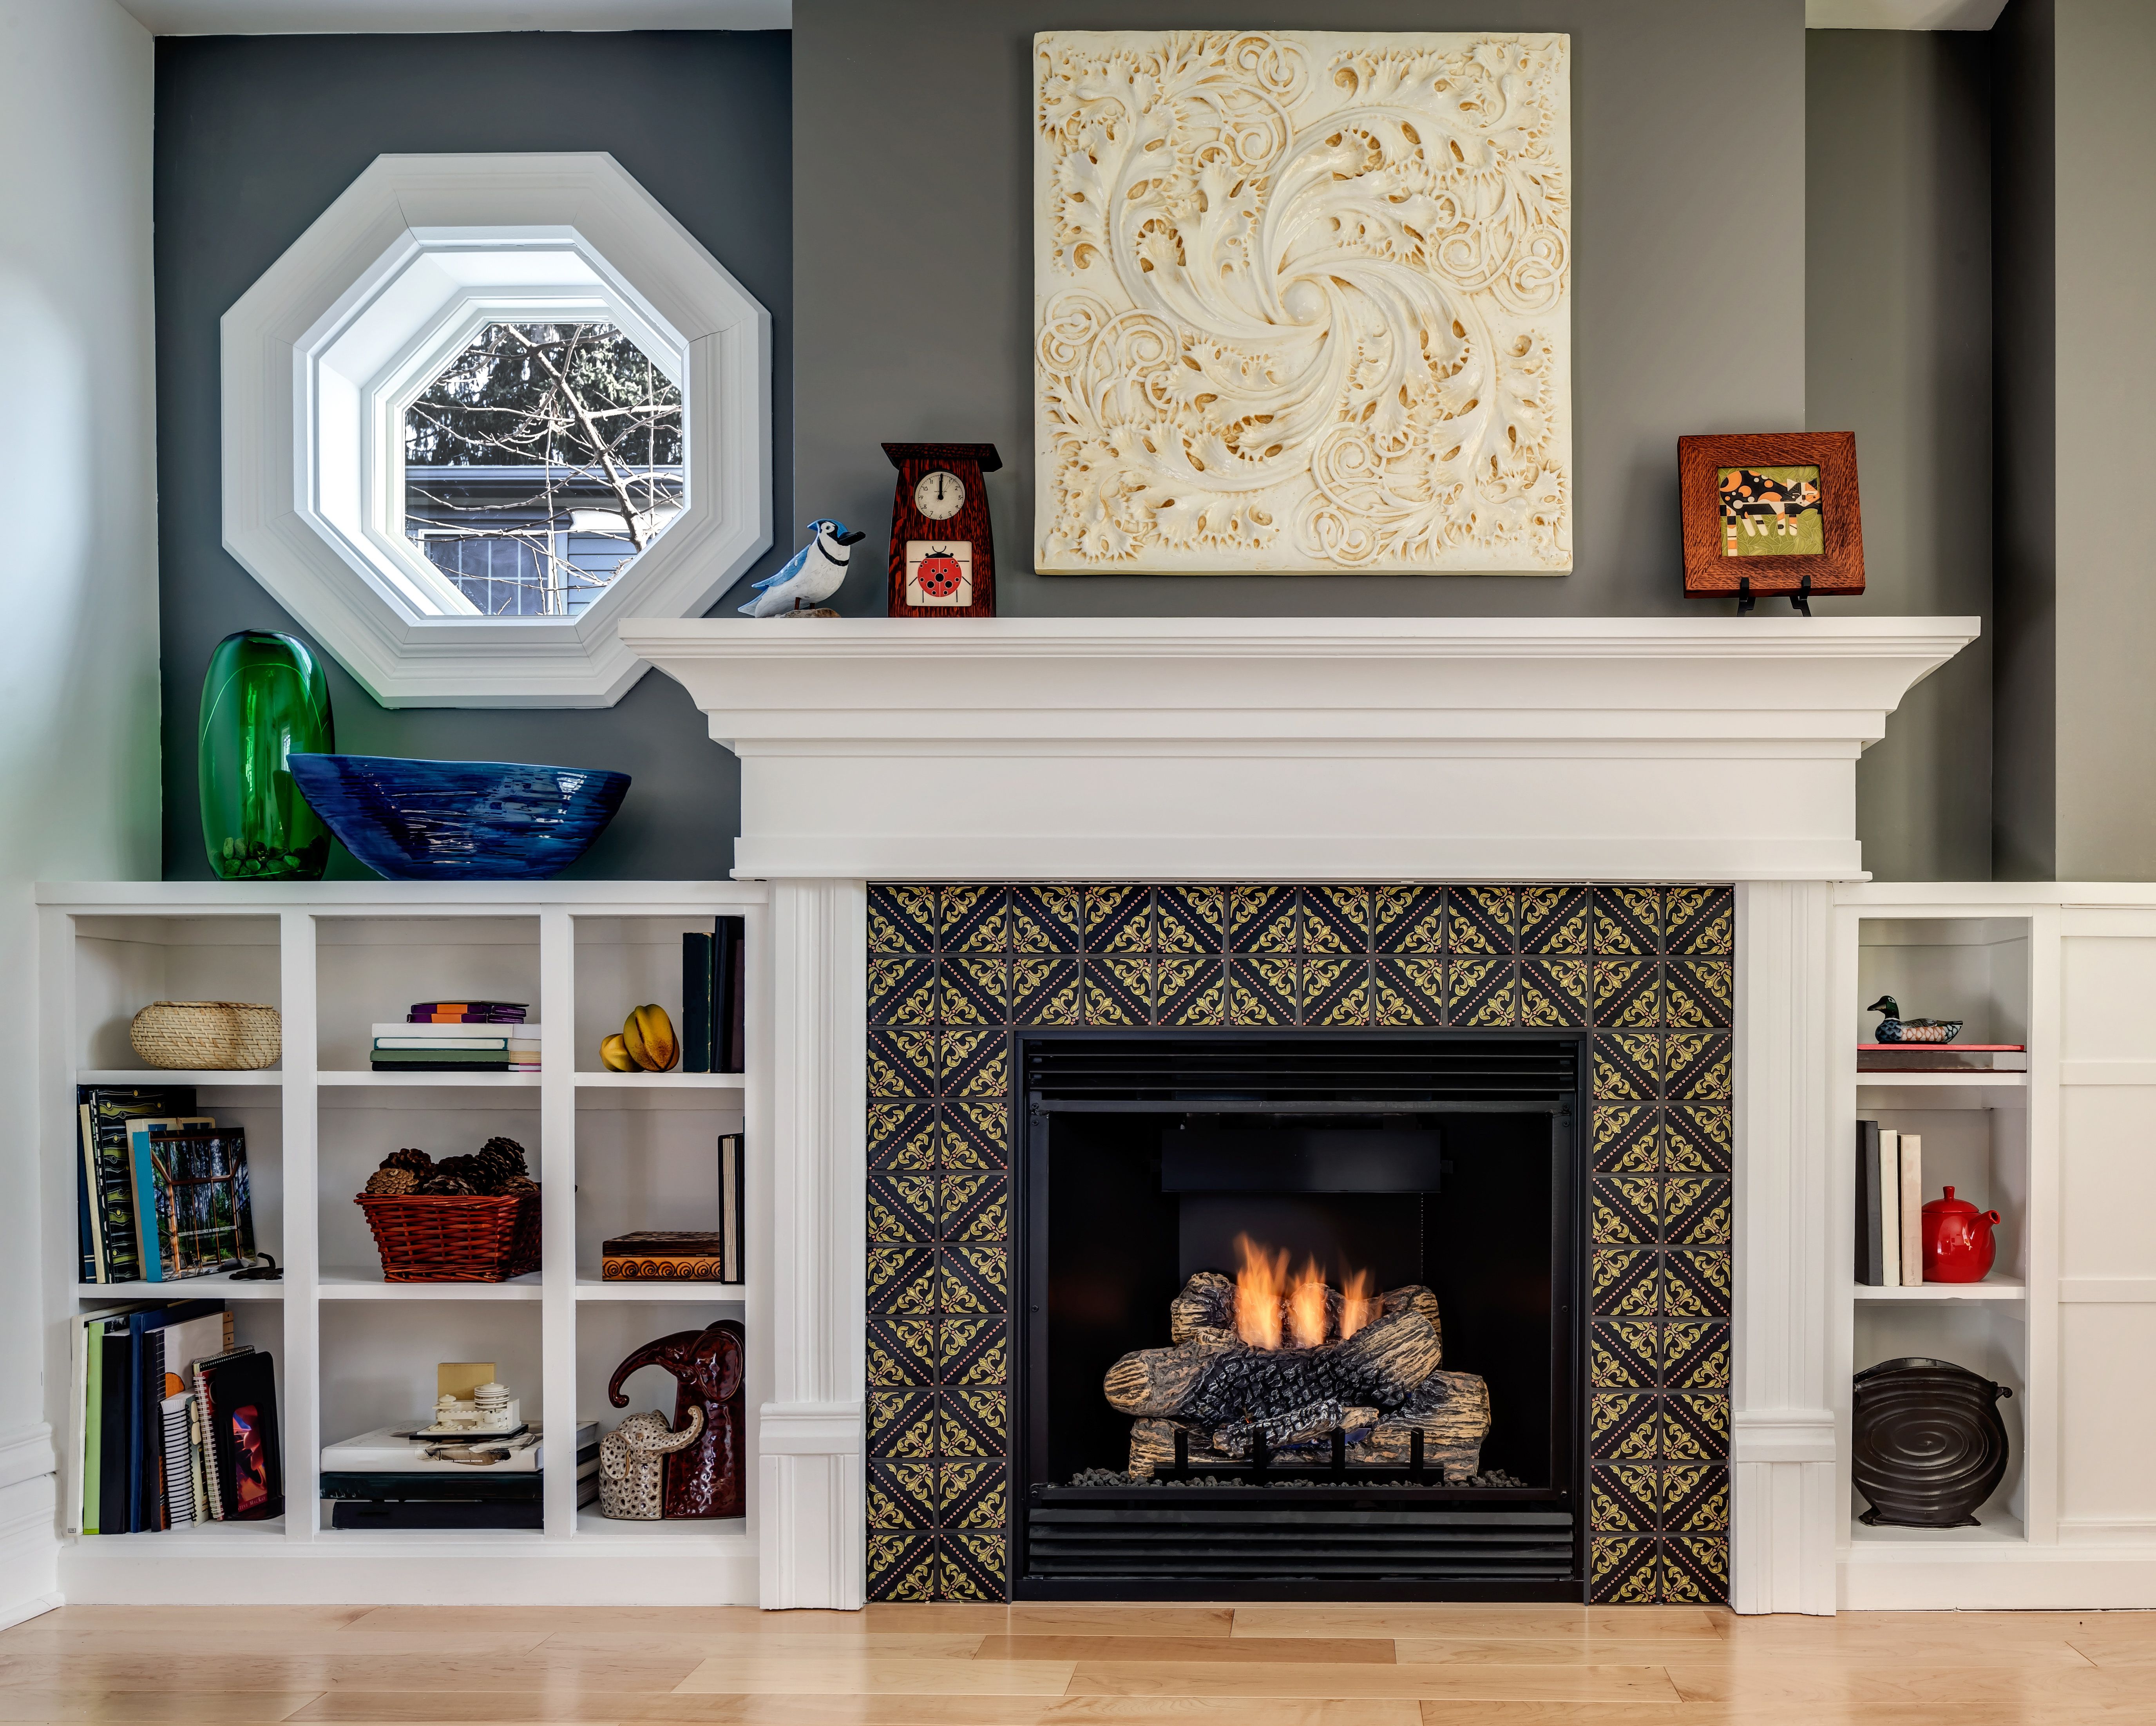 Focus Fireplaces Elegant This Small but Stylish Fireplace Features Our Lisbon Tile